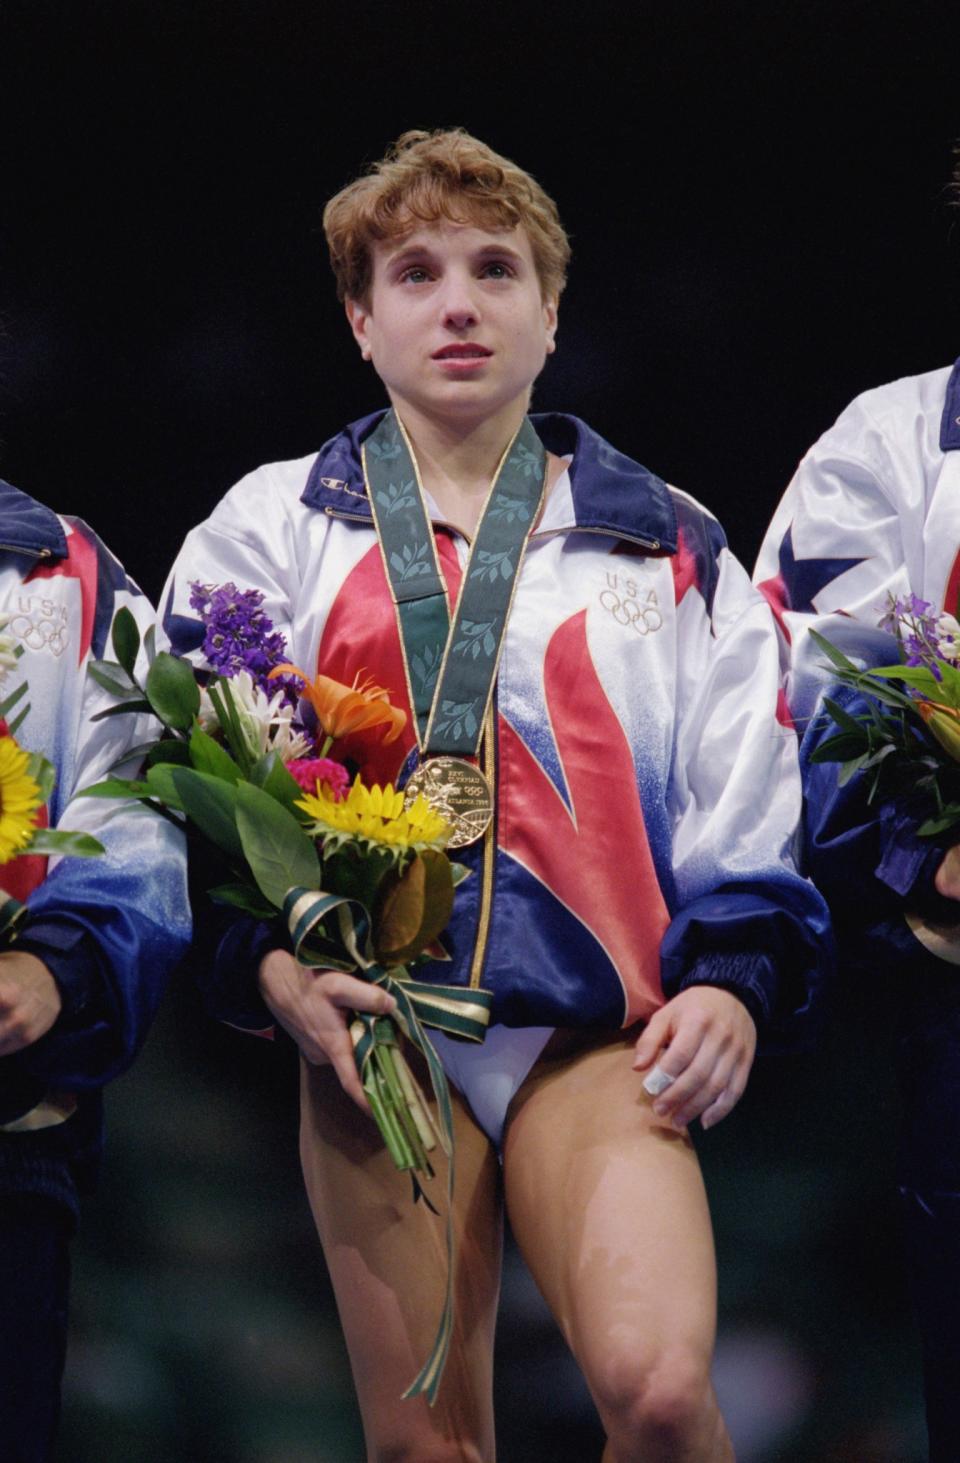 <p>Heroism at its finest. The 1996 ‘Magnificent Seven’ gymnastics team needed to win the vault in order to beat Russia. Kerri Strug was the last to compete and in her first vault attempt she fell and heard a crack from her ankle. Pushing through the pain, Strug stuck the vault landing, giving the U.S. their first-ever team gold. (Getty) </p>